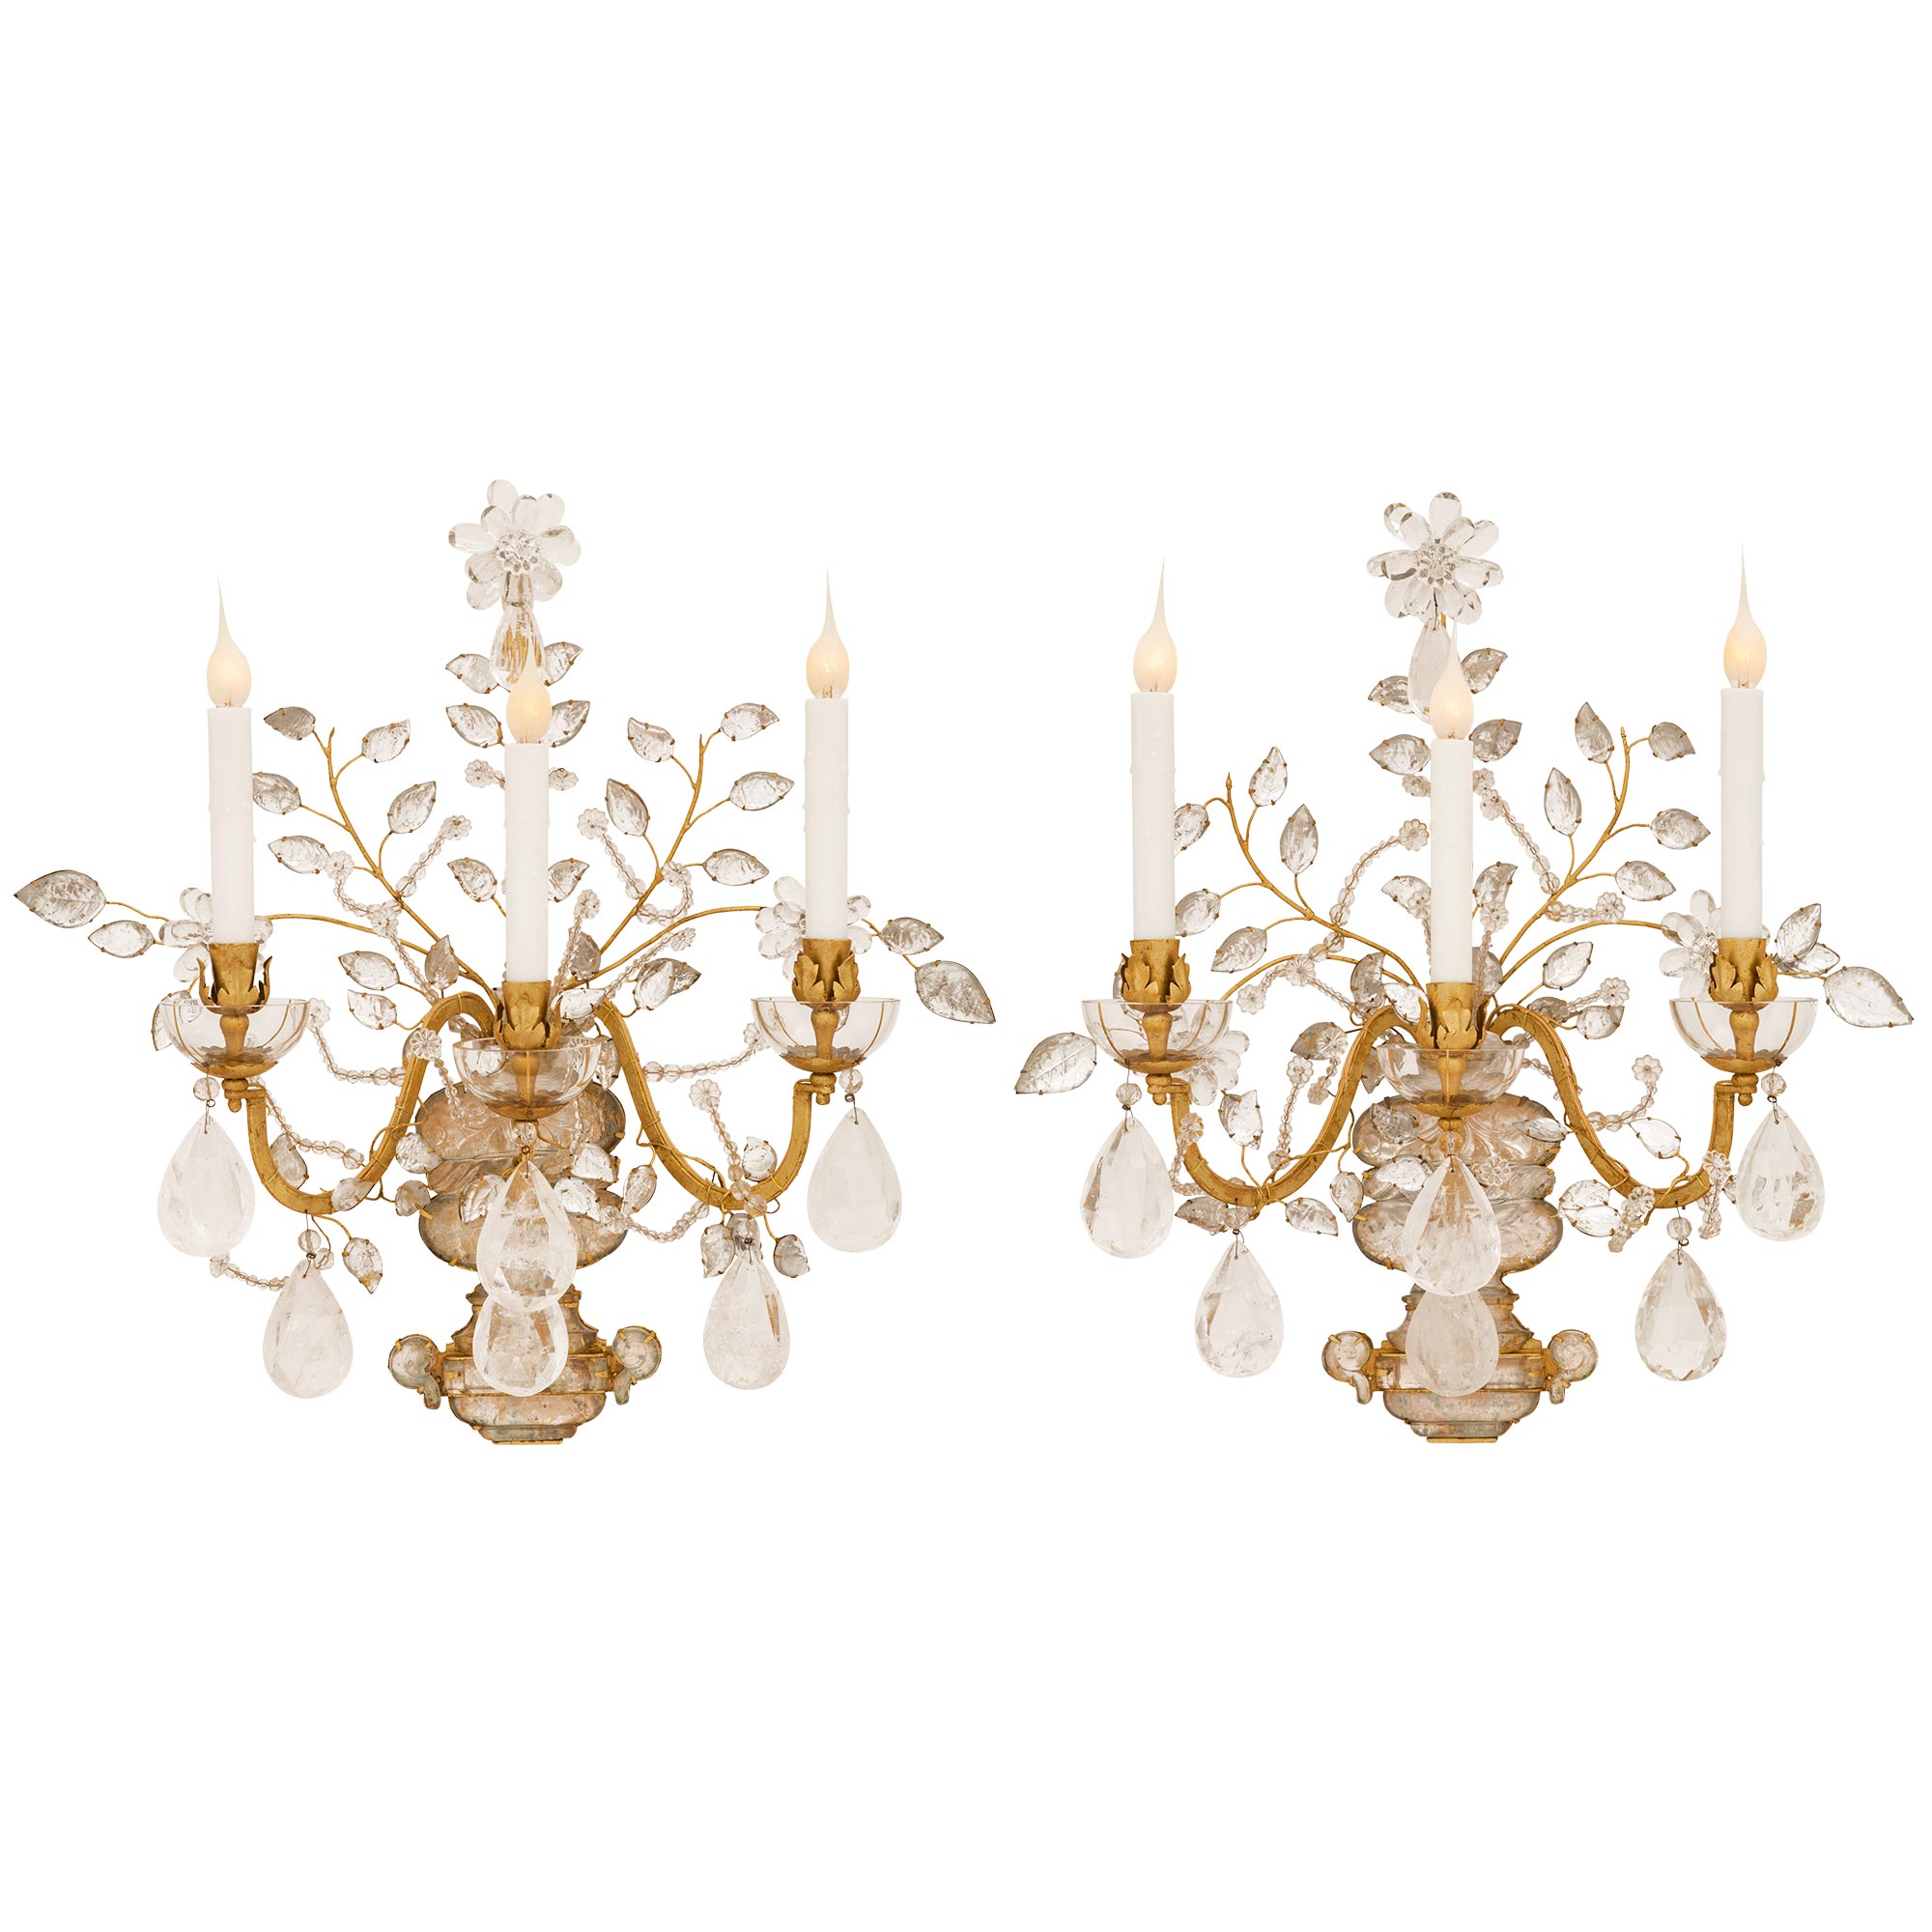 True Pair Of French 20th c. Louis XVI St. Crystal & Rock Crystal Sconces